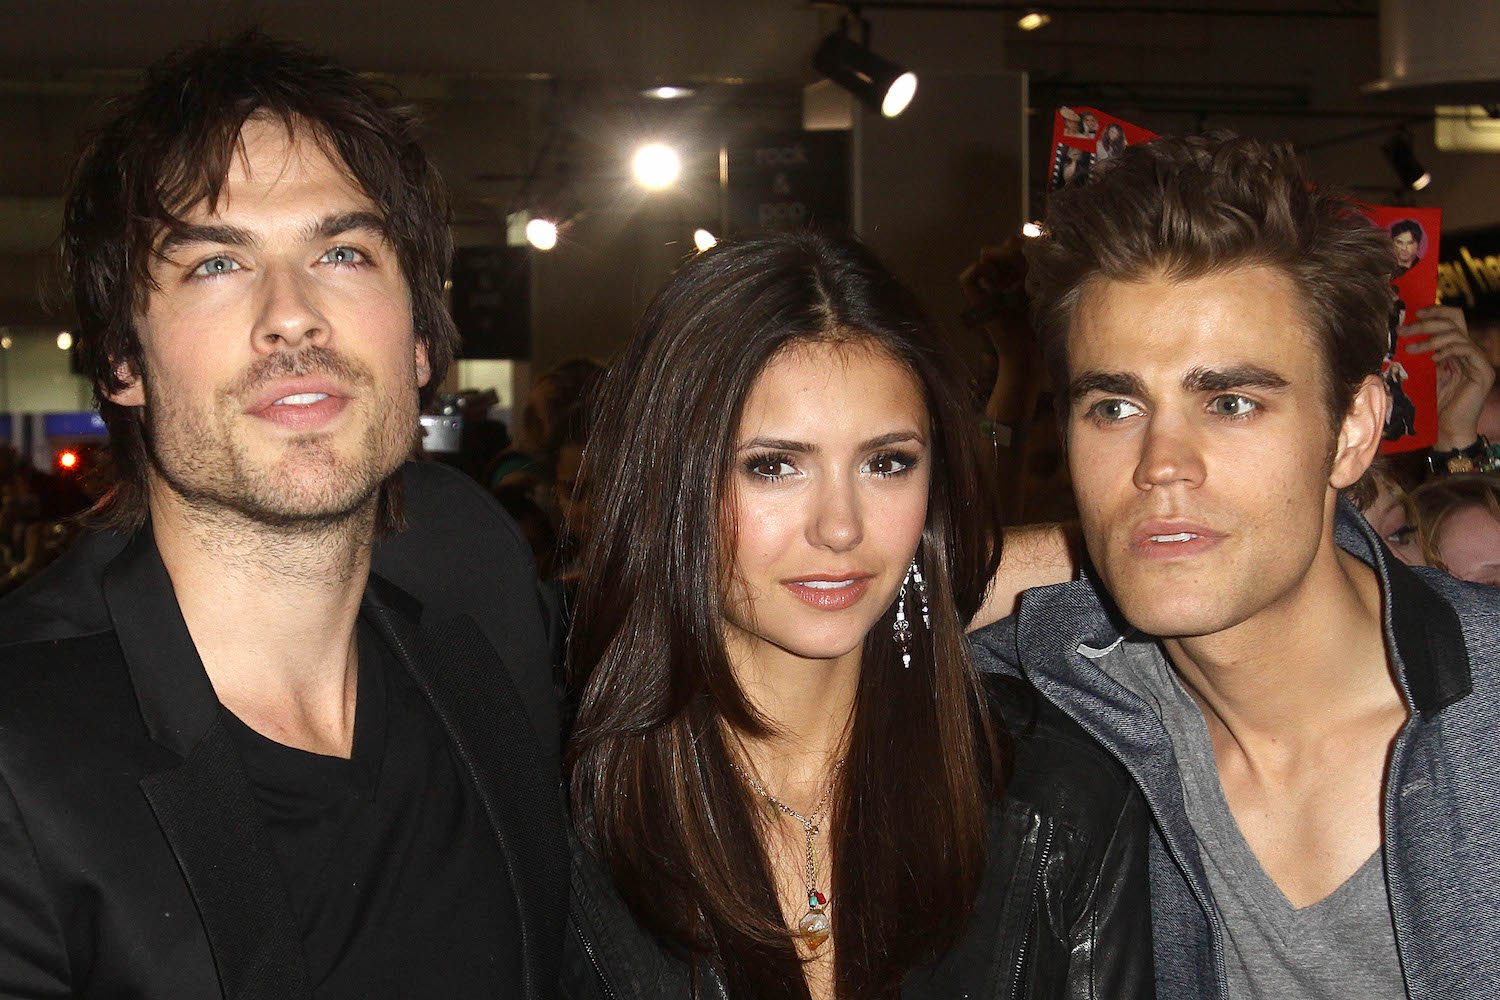 Ian Somerhalder, Nina Dobrev, and Paul Wesley from 'The Vampire Diaries' standing next to one another